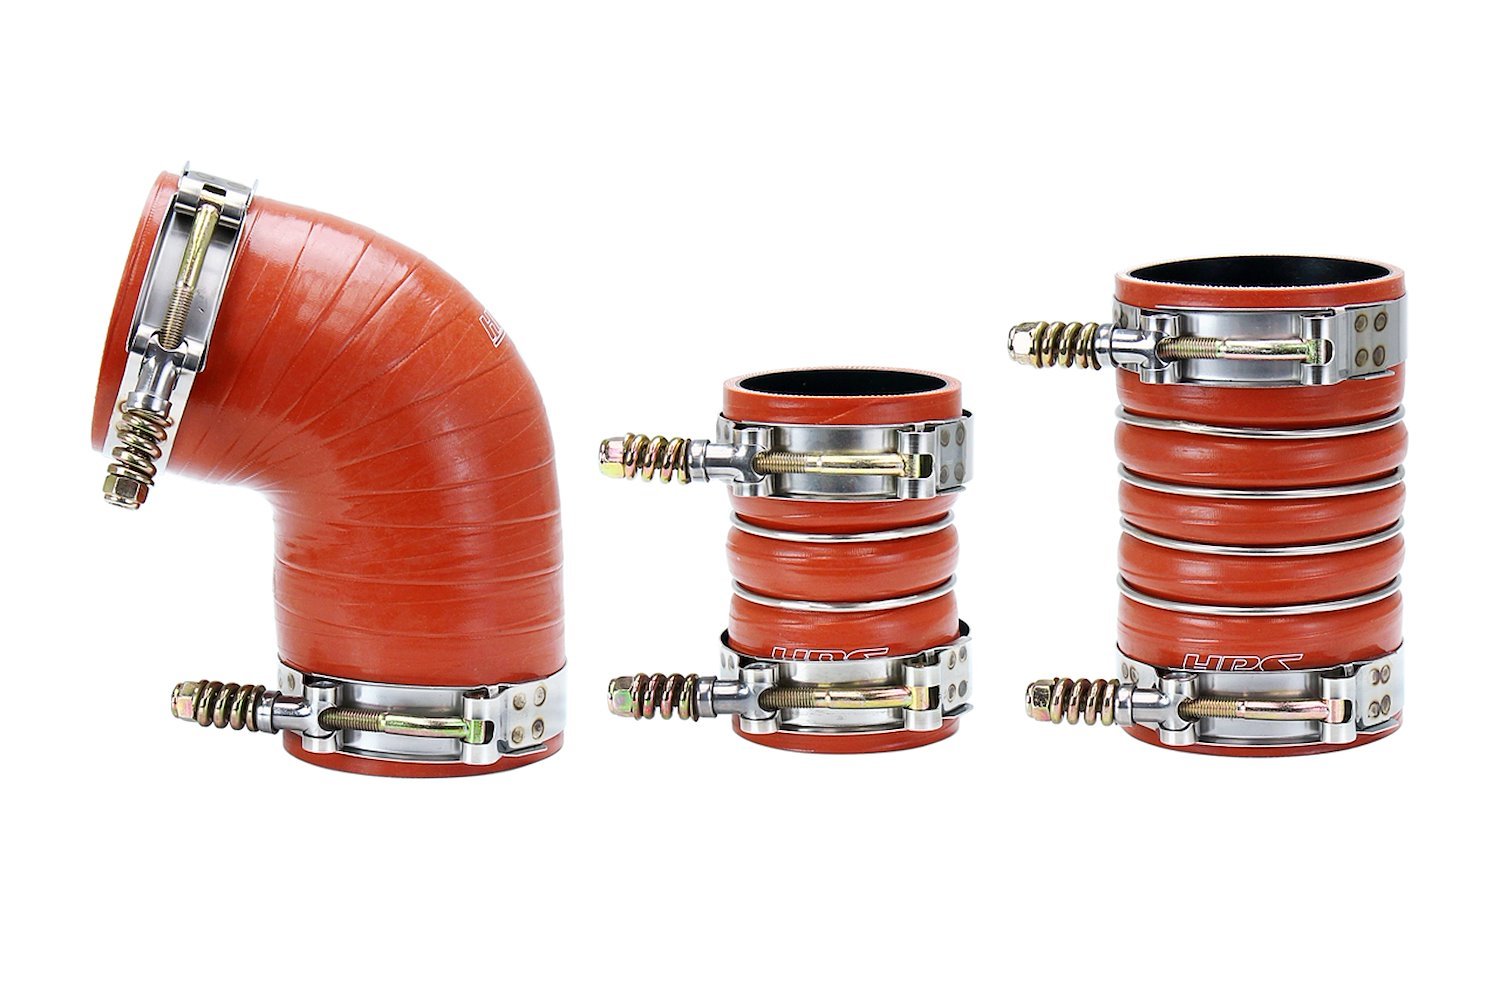 57-1573 Intercooler Hose Kit, High-Temp 4-Ply Reinforced Silicone, Replace OEM Rubber Intercooler Turbo Boots